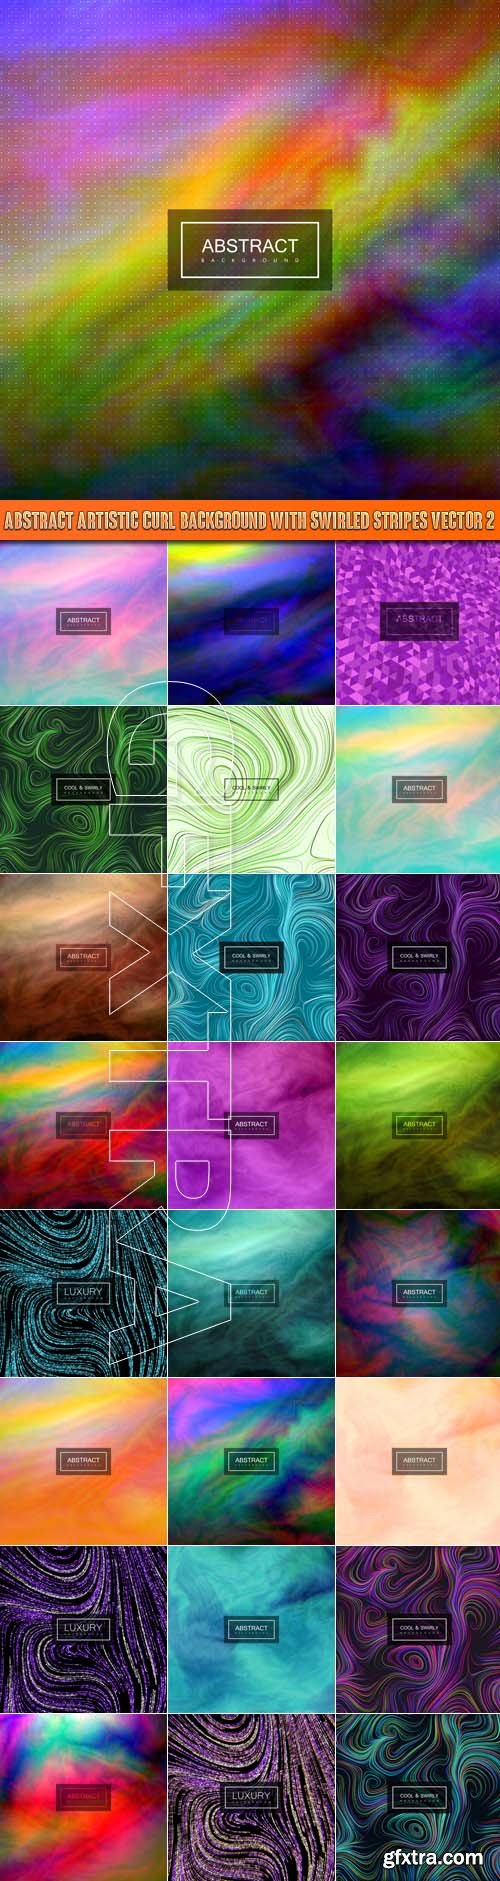 Abstract artistic curl background with swirled stripes vector 2